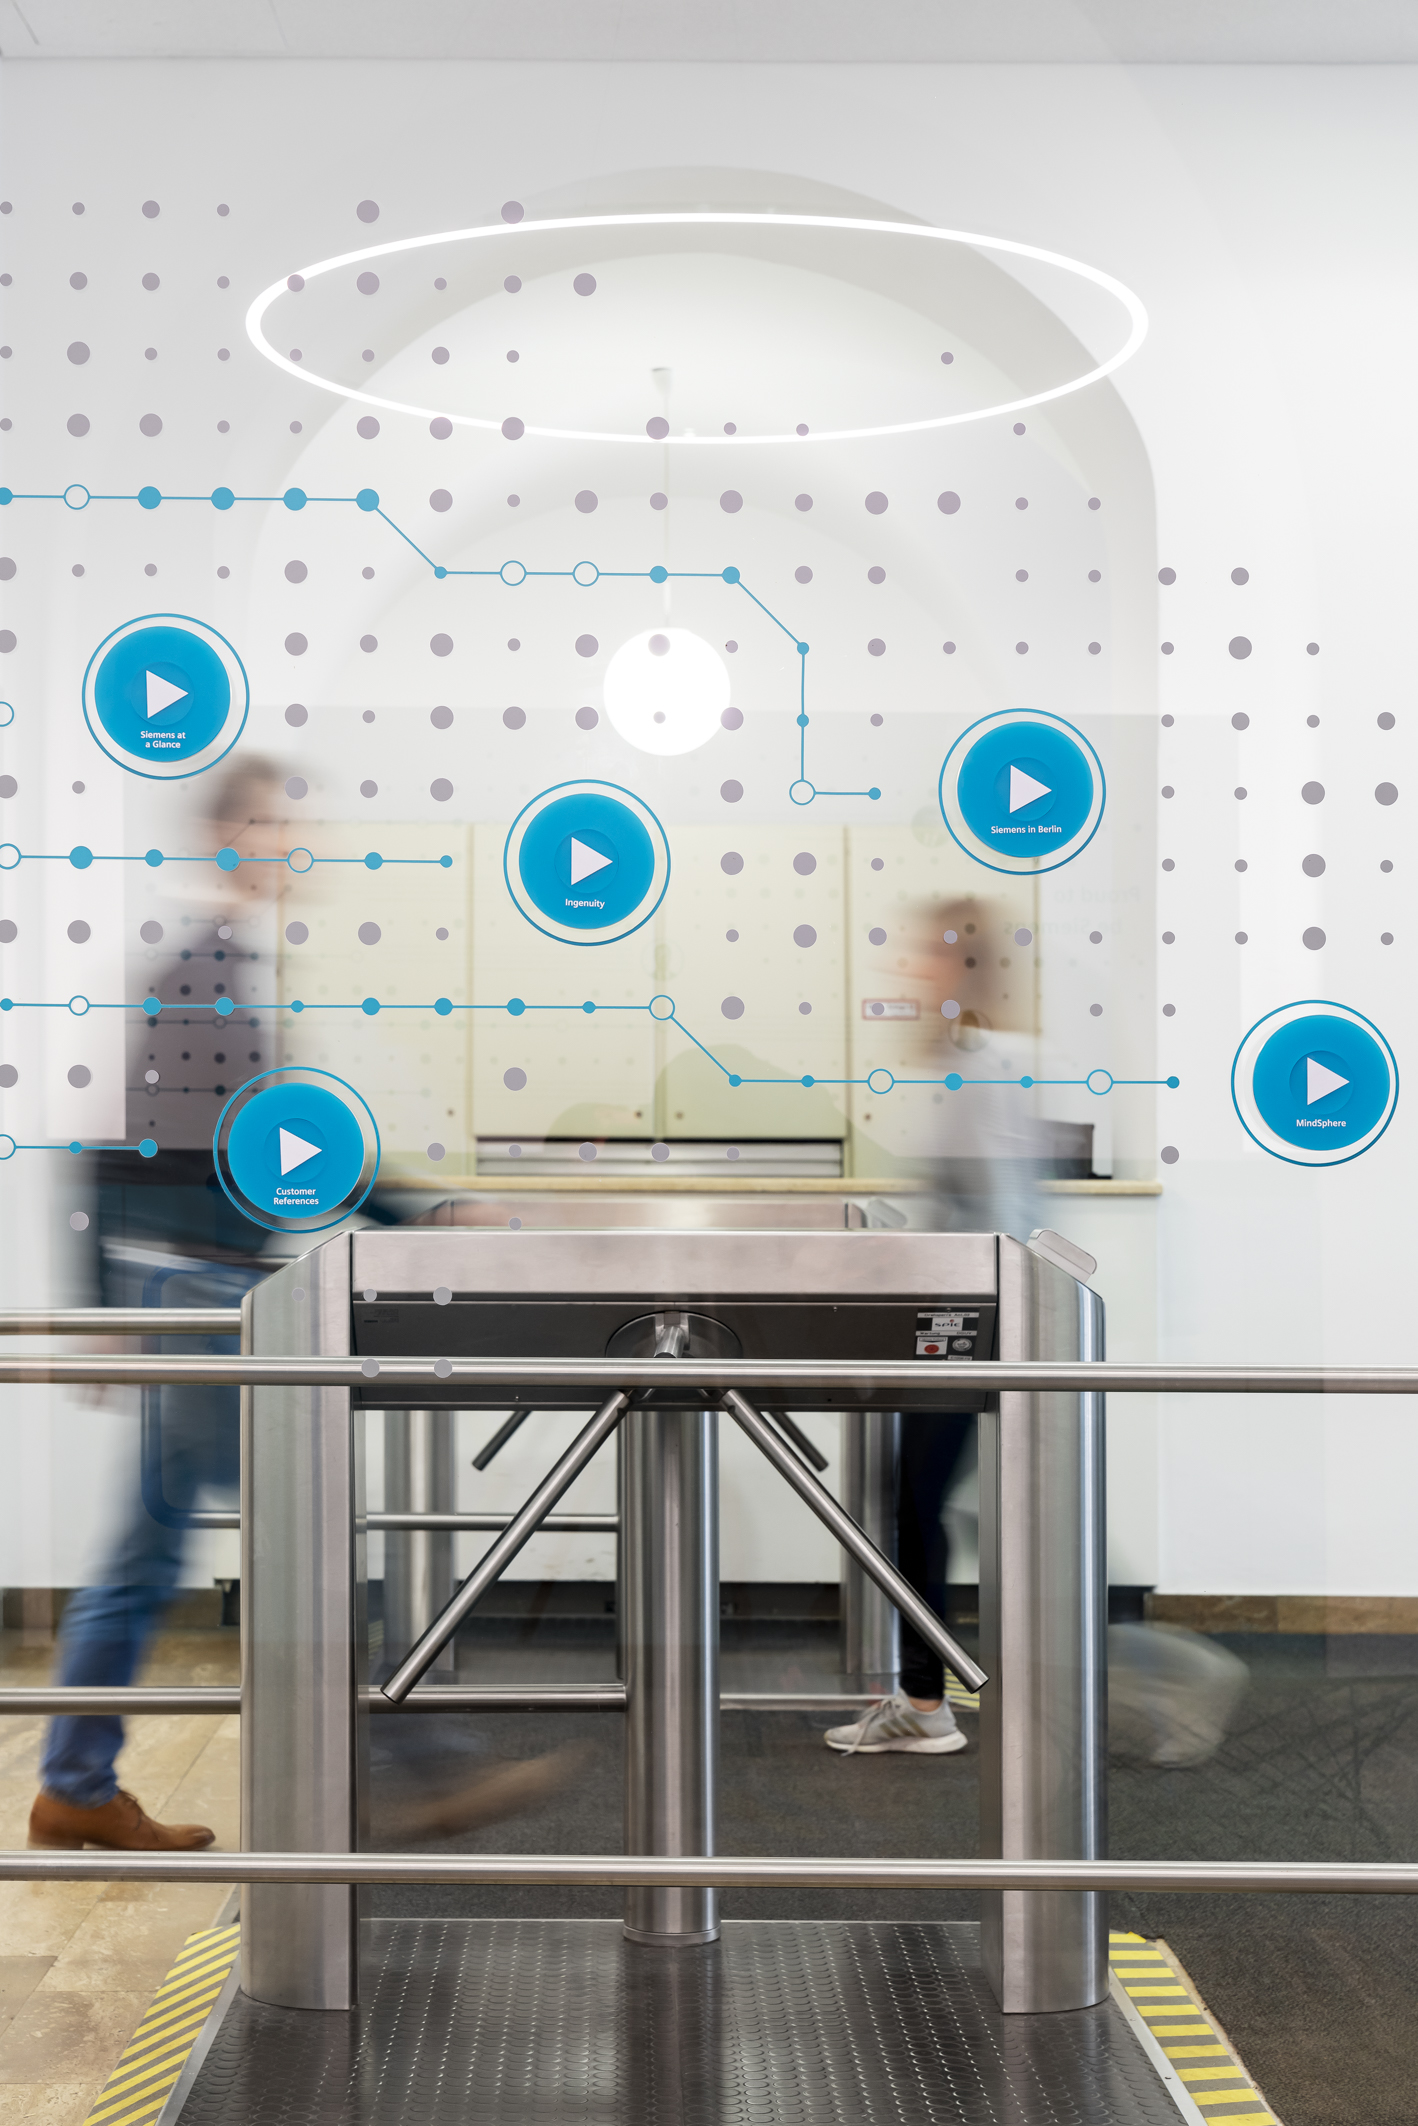 Glass wall blue buttons to interact with persons in the background